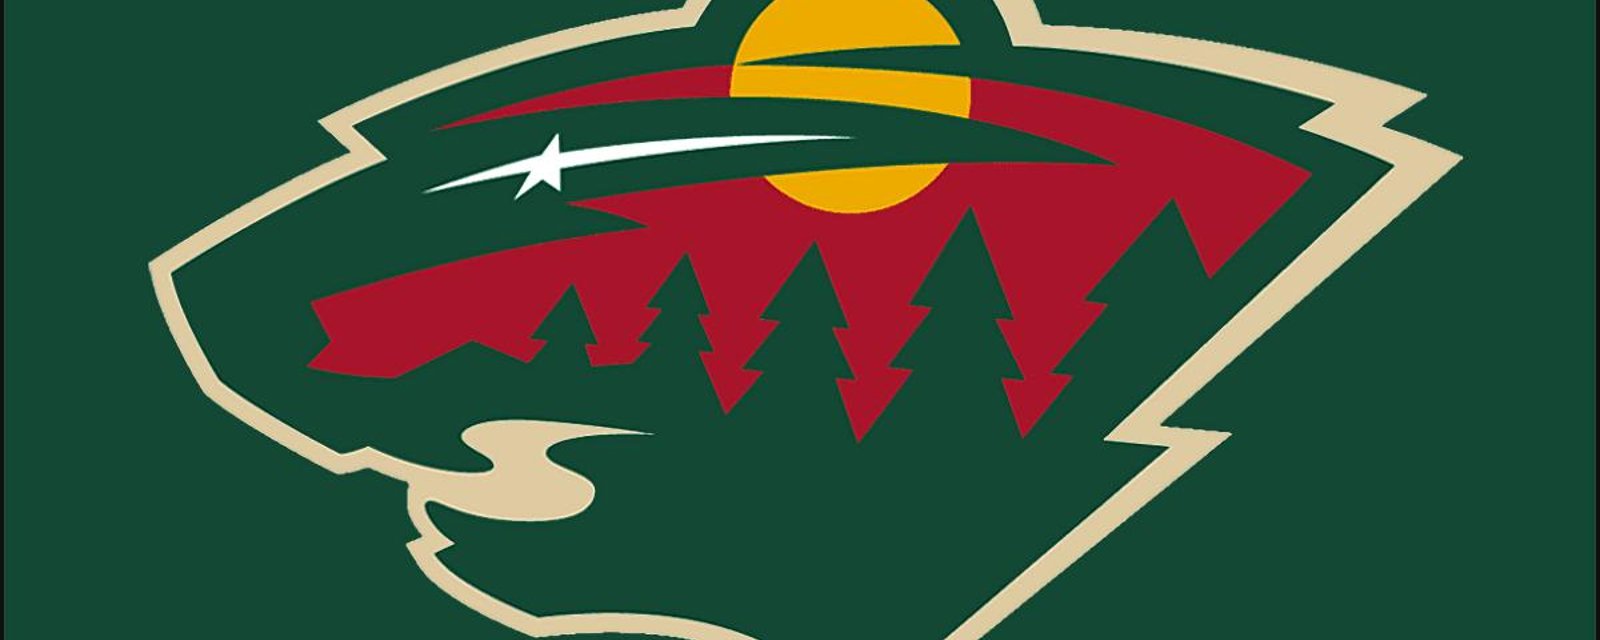 Wild cut 8 players from their training camp roster on Sunday.